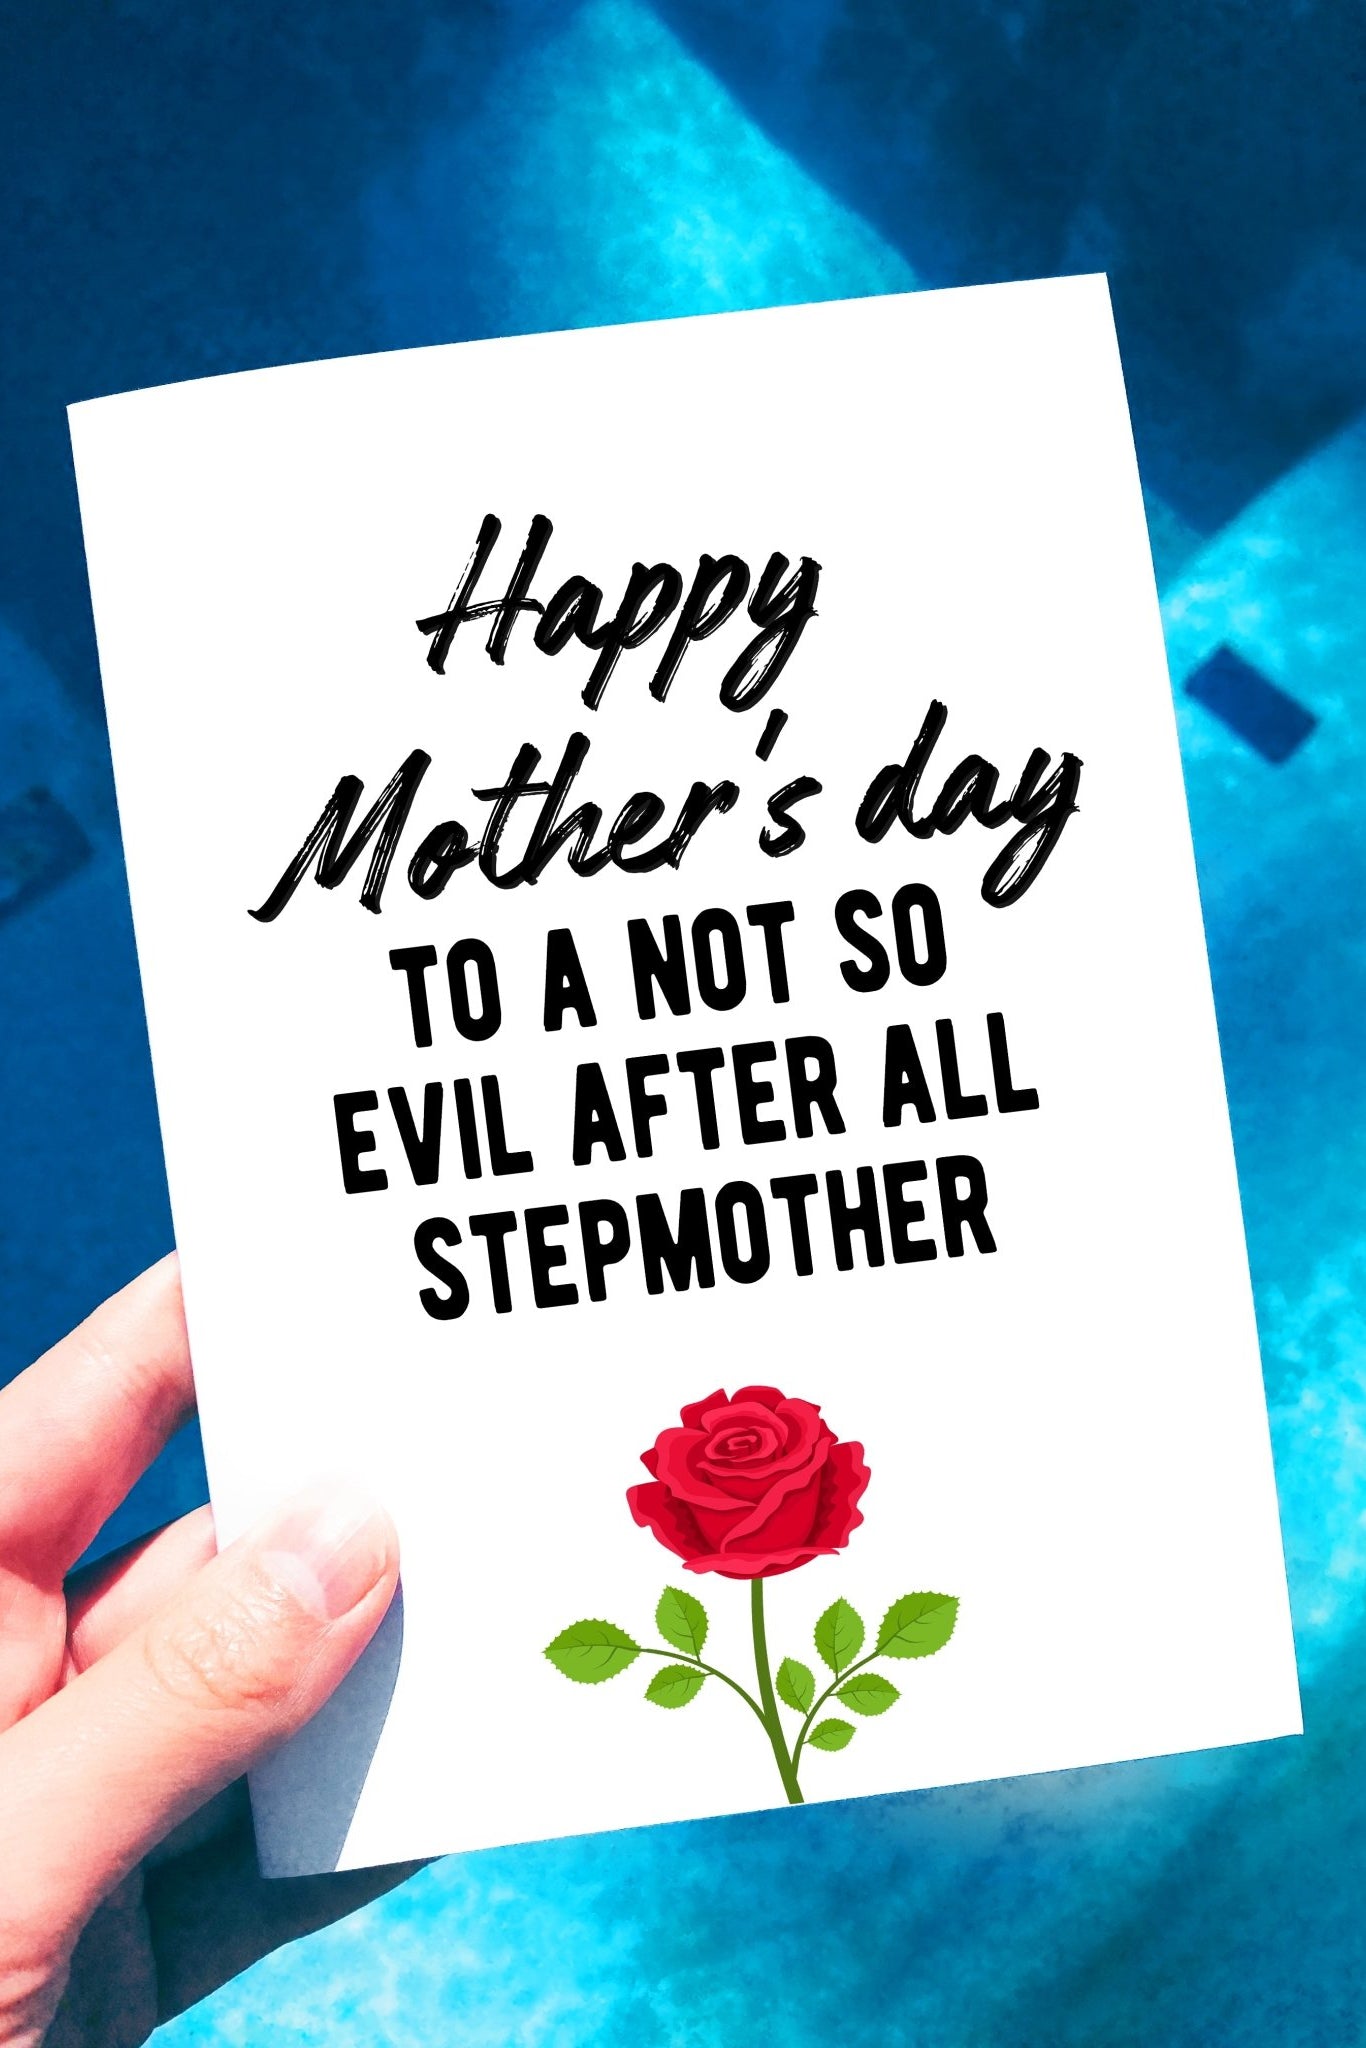 Happy Mother's Day To A Not So Evil After All Stepmother Greeting Card - UntamedEgo LLC.